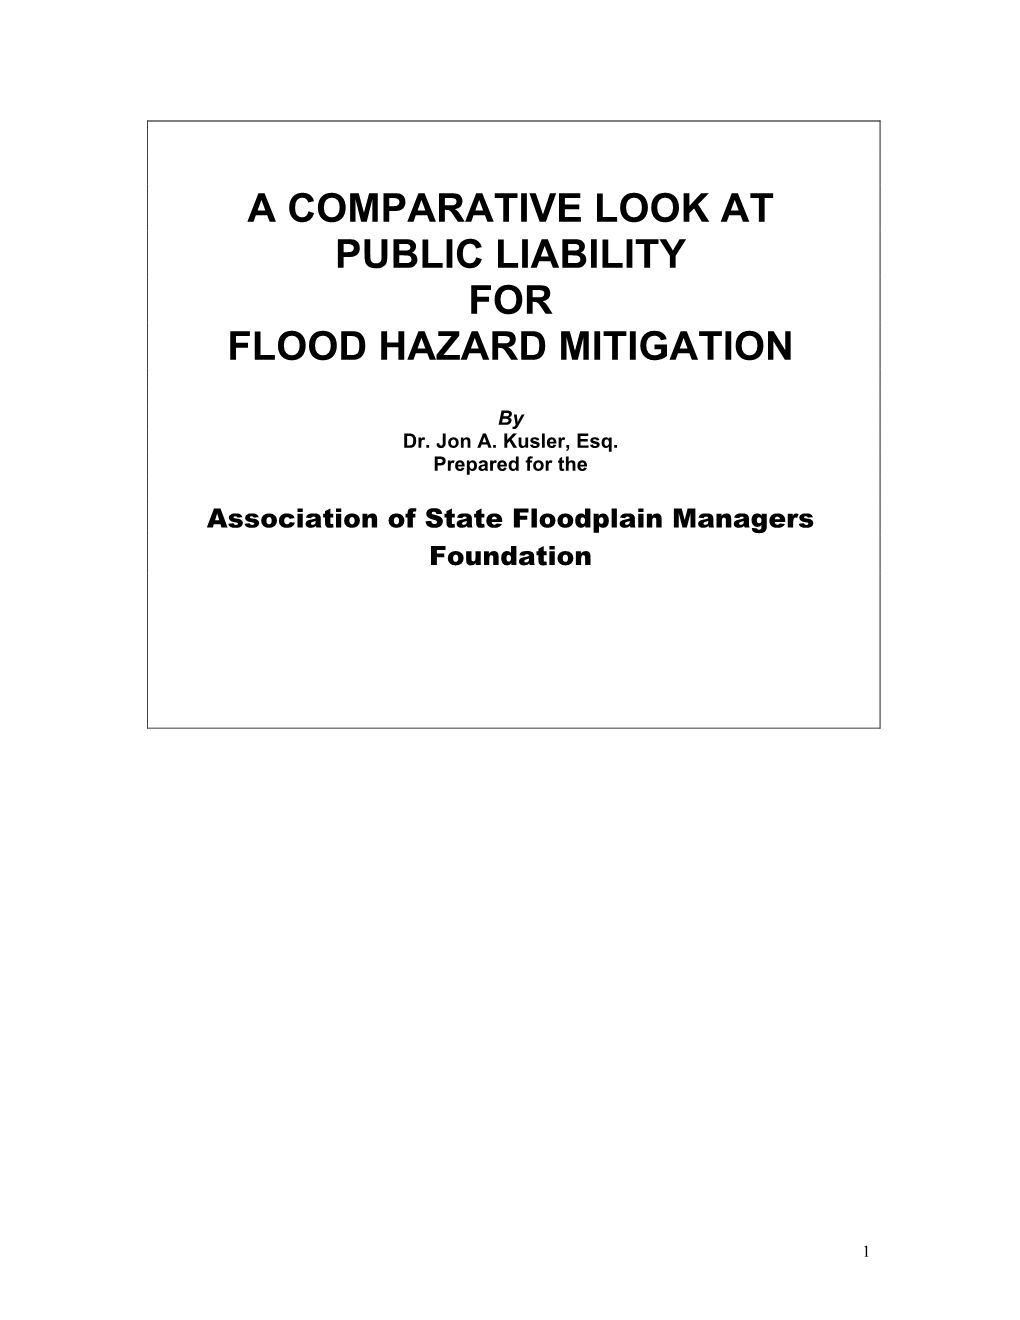 A Comparative Look at Public Liability for Flood Hazard Mitigation